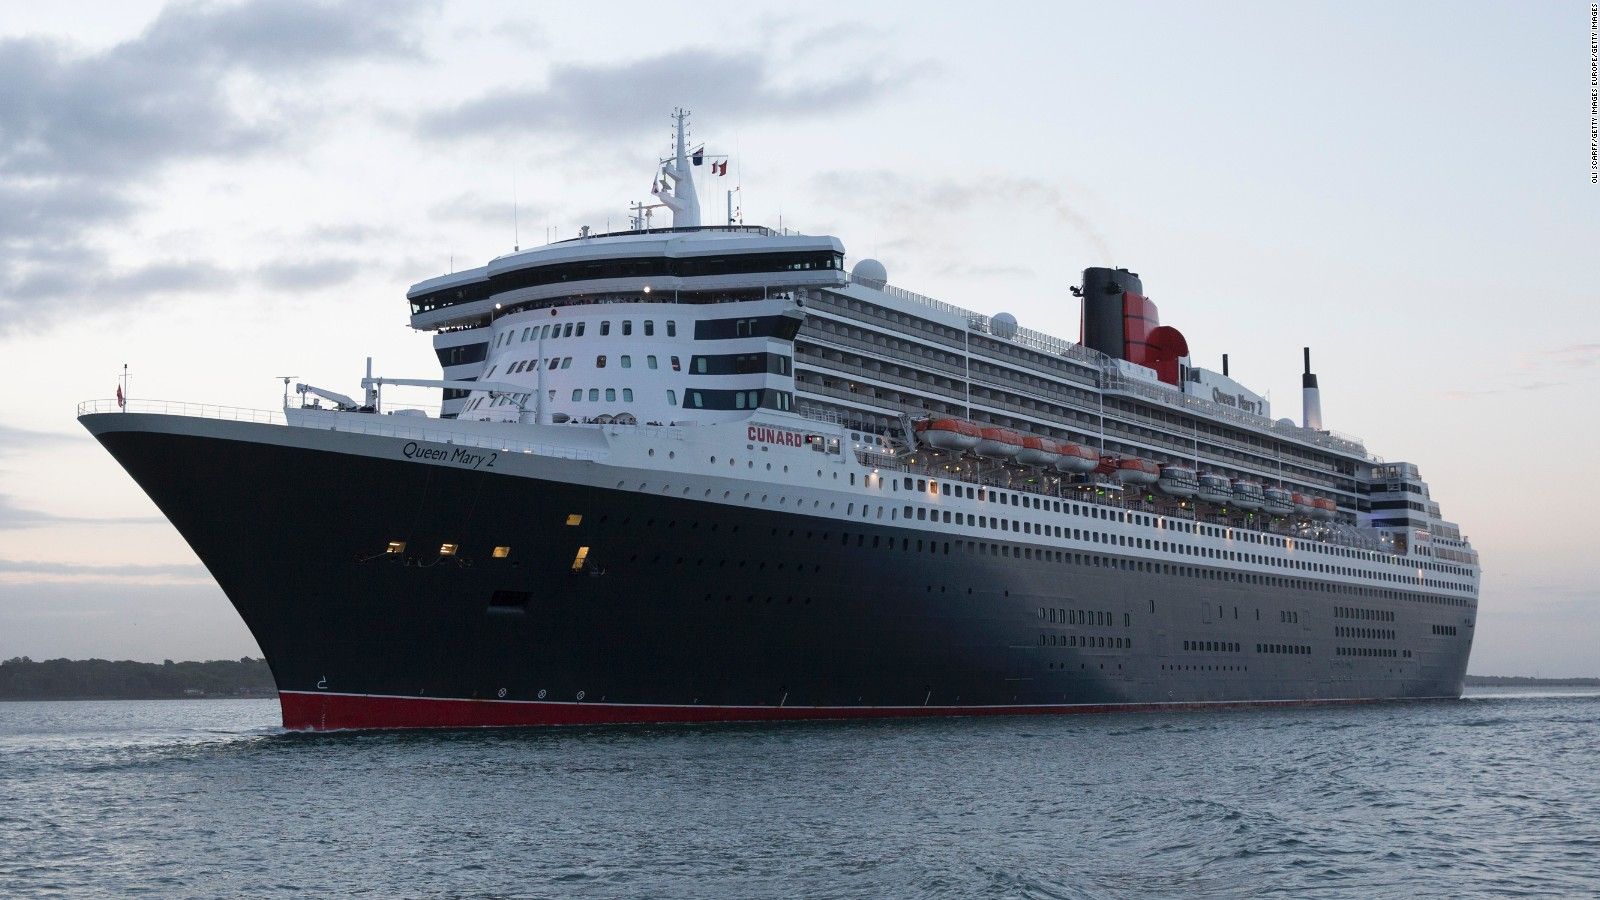 Queen Mary 2 gets a $130M facelift